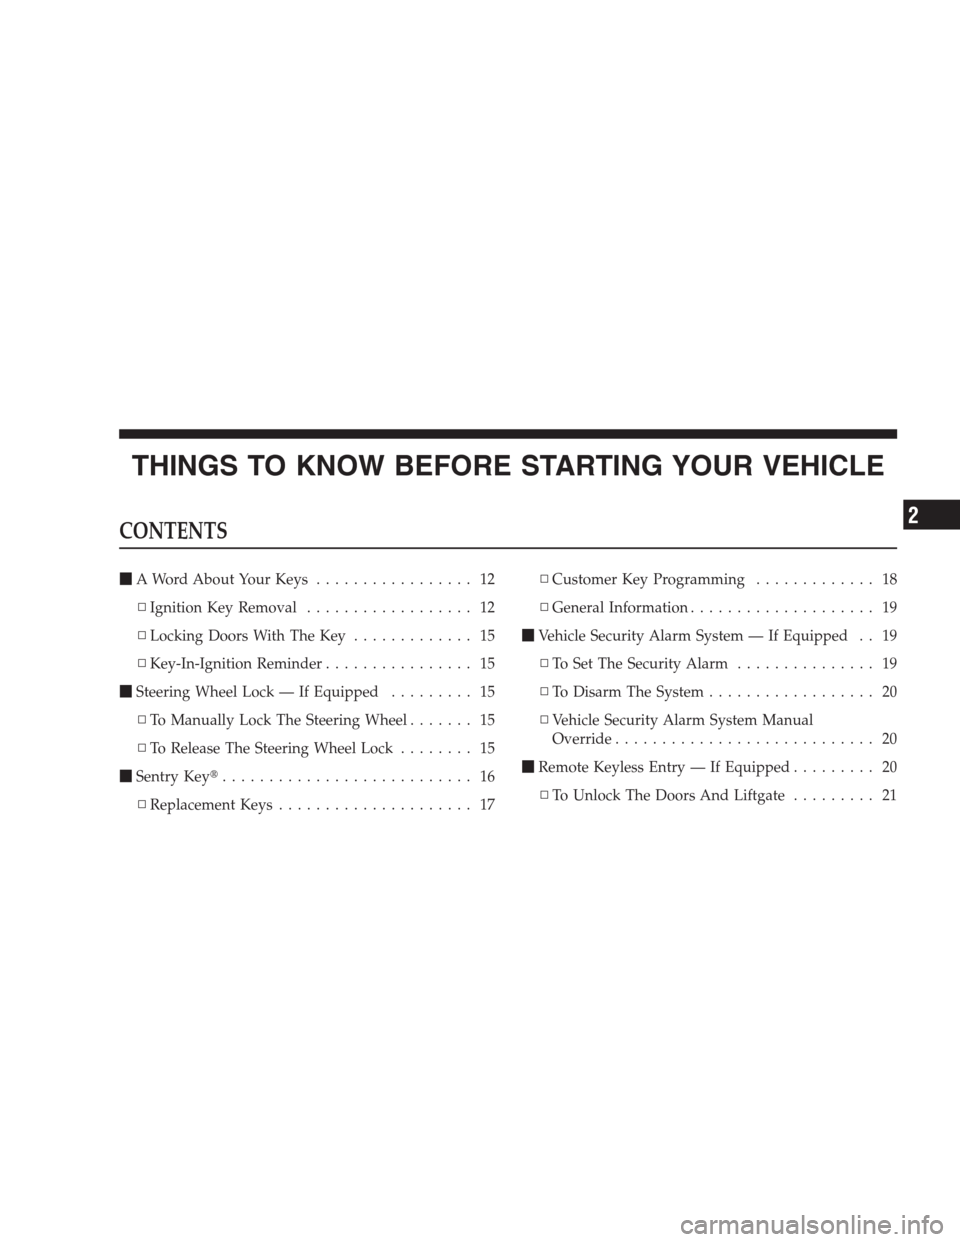 JEEP PATRIOT 2009 1.G Owners Manual THINGS TO KNOW BEFORE STARTING YOUR VEHICLE
CONTENTS
A Word About Your Keys................. 12
▫Ignition Key Removal.................. 12
▫Locking Doors With The Key............. 15
▫Key-In-Ig